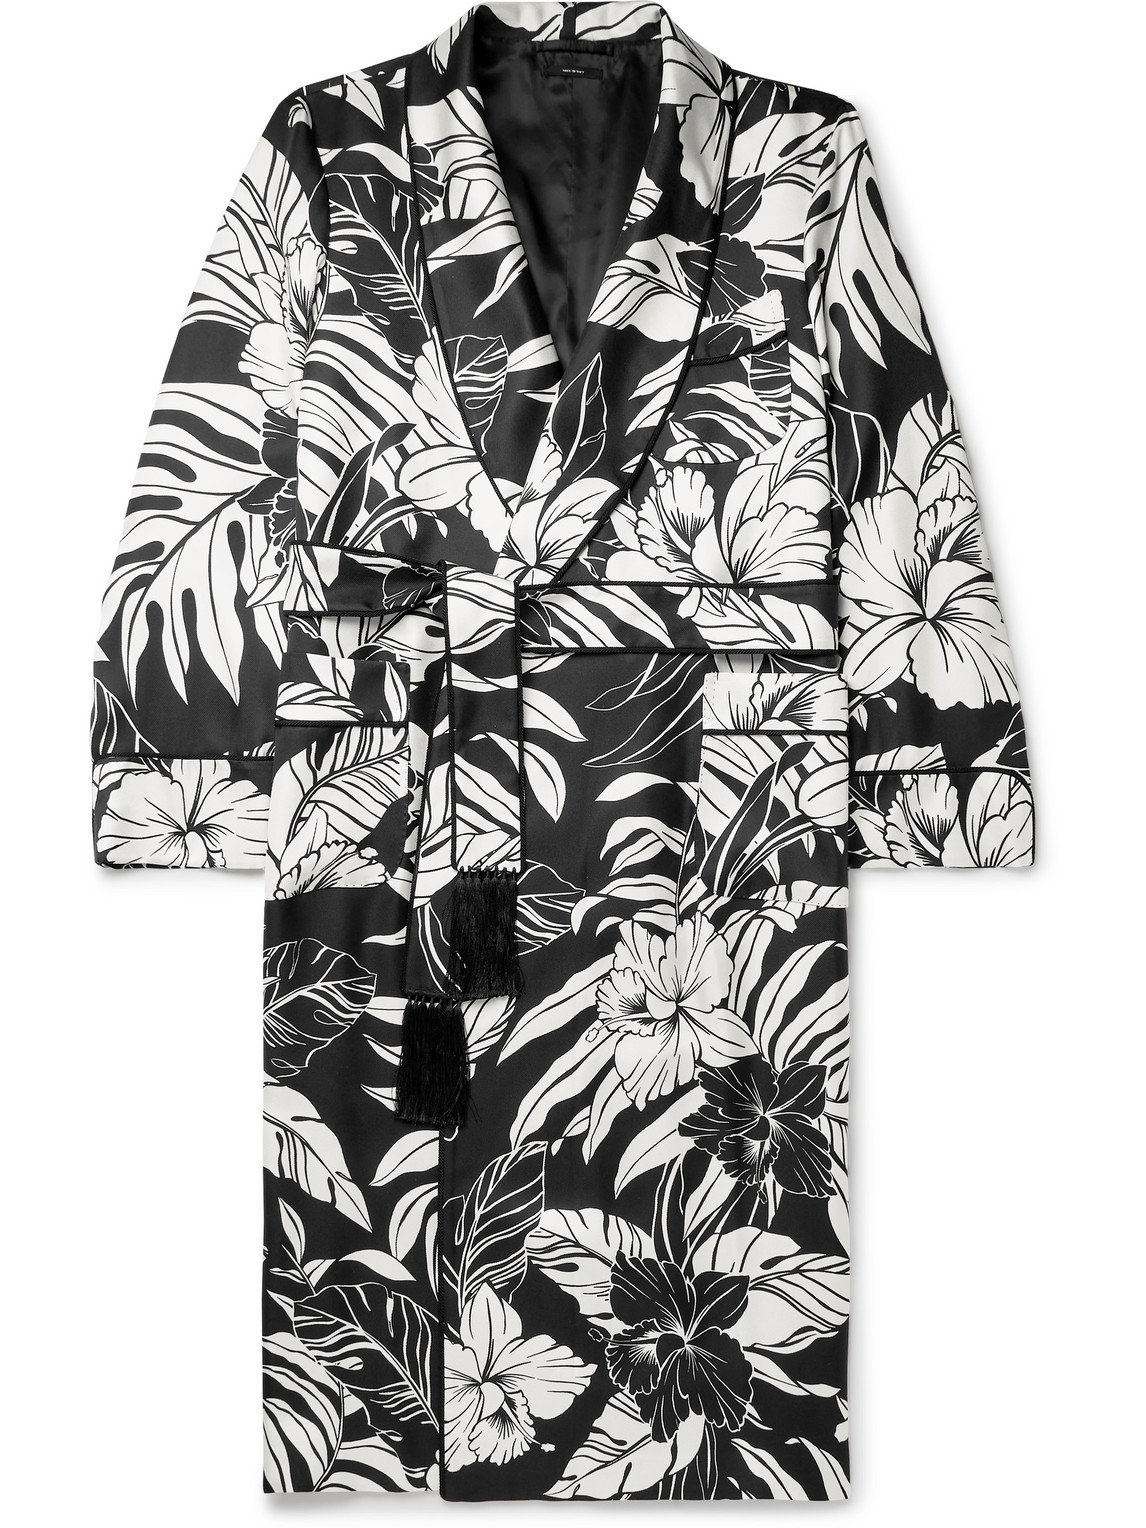 TOM FORD TASSELLED PIPED FLORAL-PRINT SILK-TWILL dressing gown